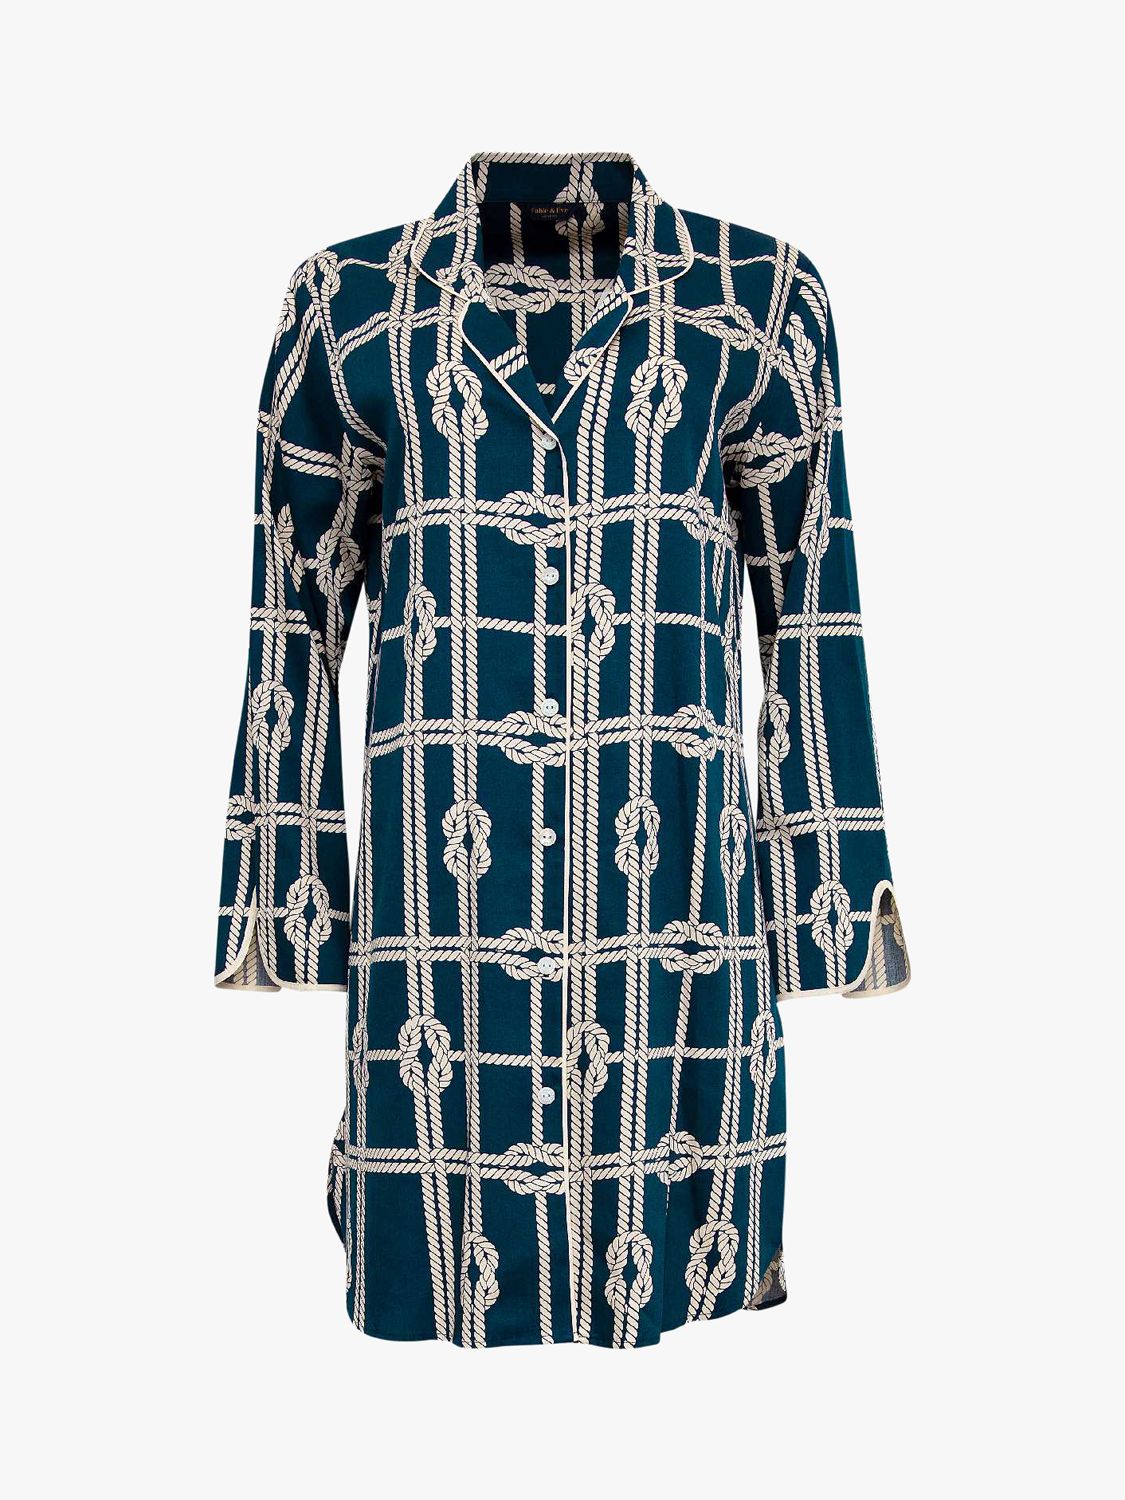 Buy Fable & Eve Rope Print Nightshirt, Navy Mix Online at johnlewis.com